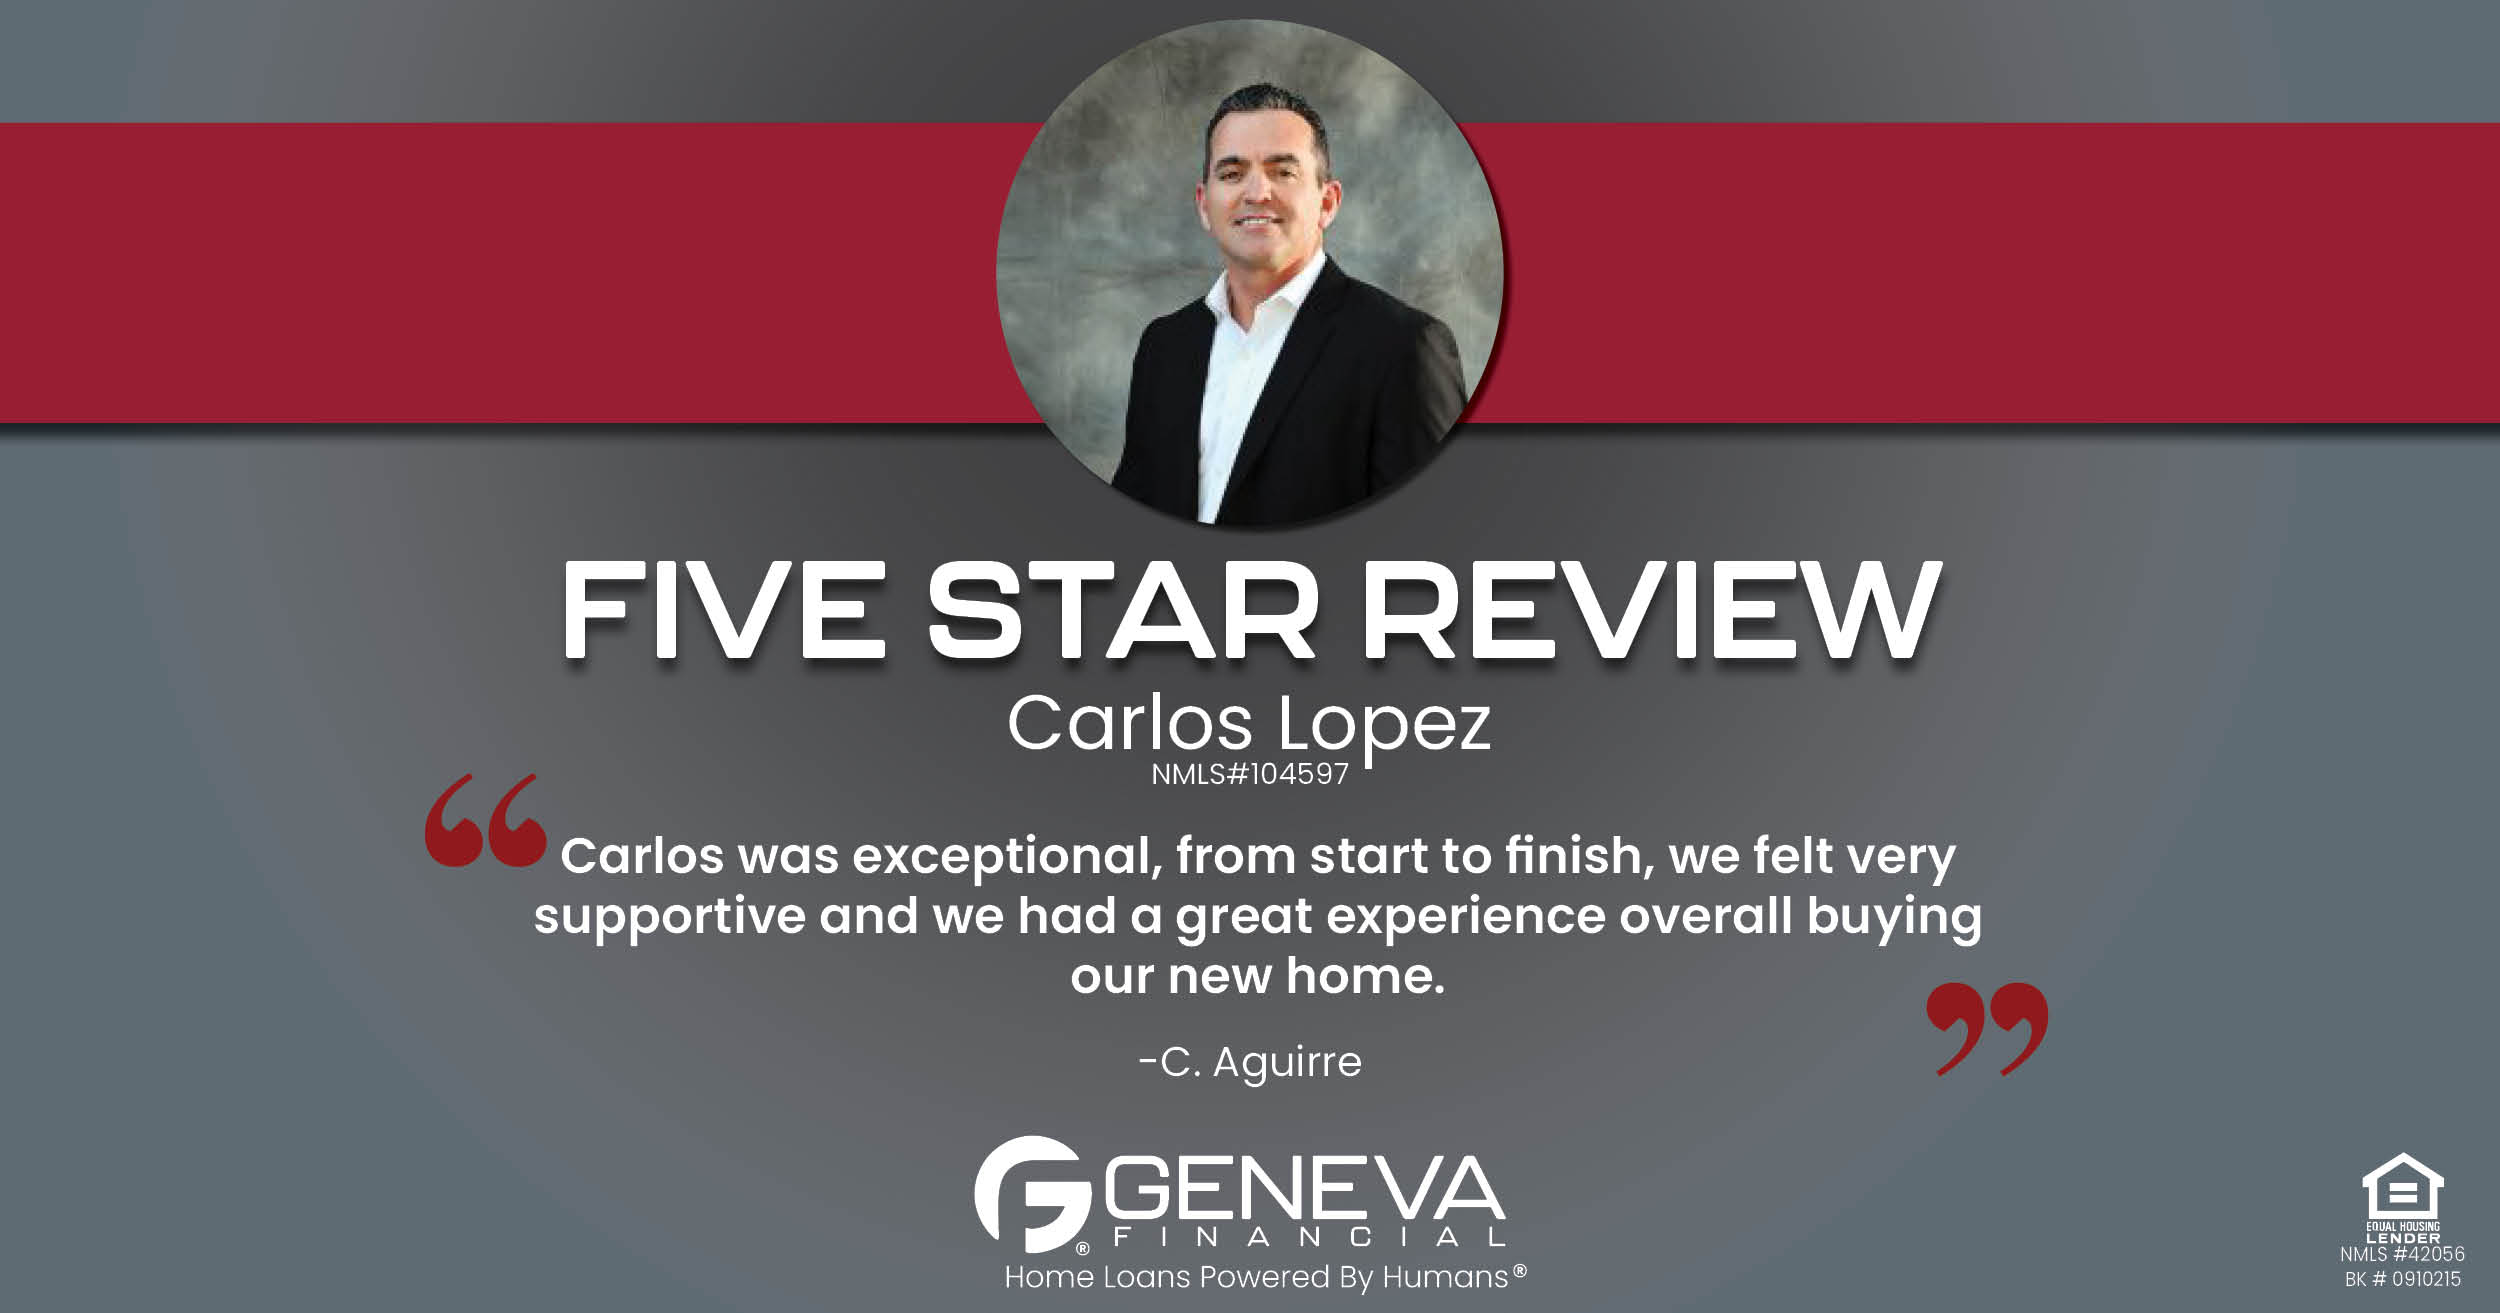 5 Star Review for Carlos Lopez, Licensed Mortgage Loan Officer with Geneva Financial, Frisco, TX – Home Loans Powered by Humans®.